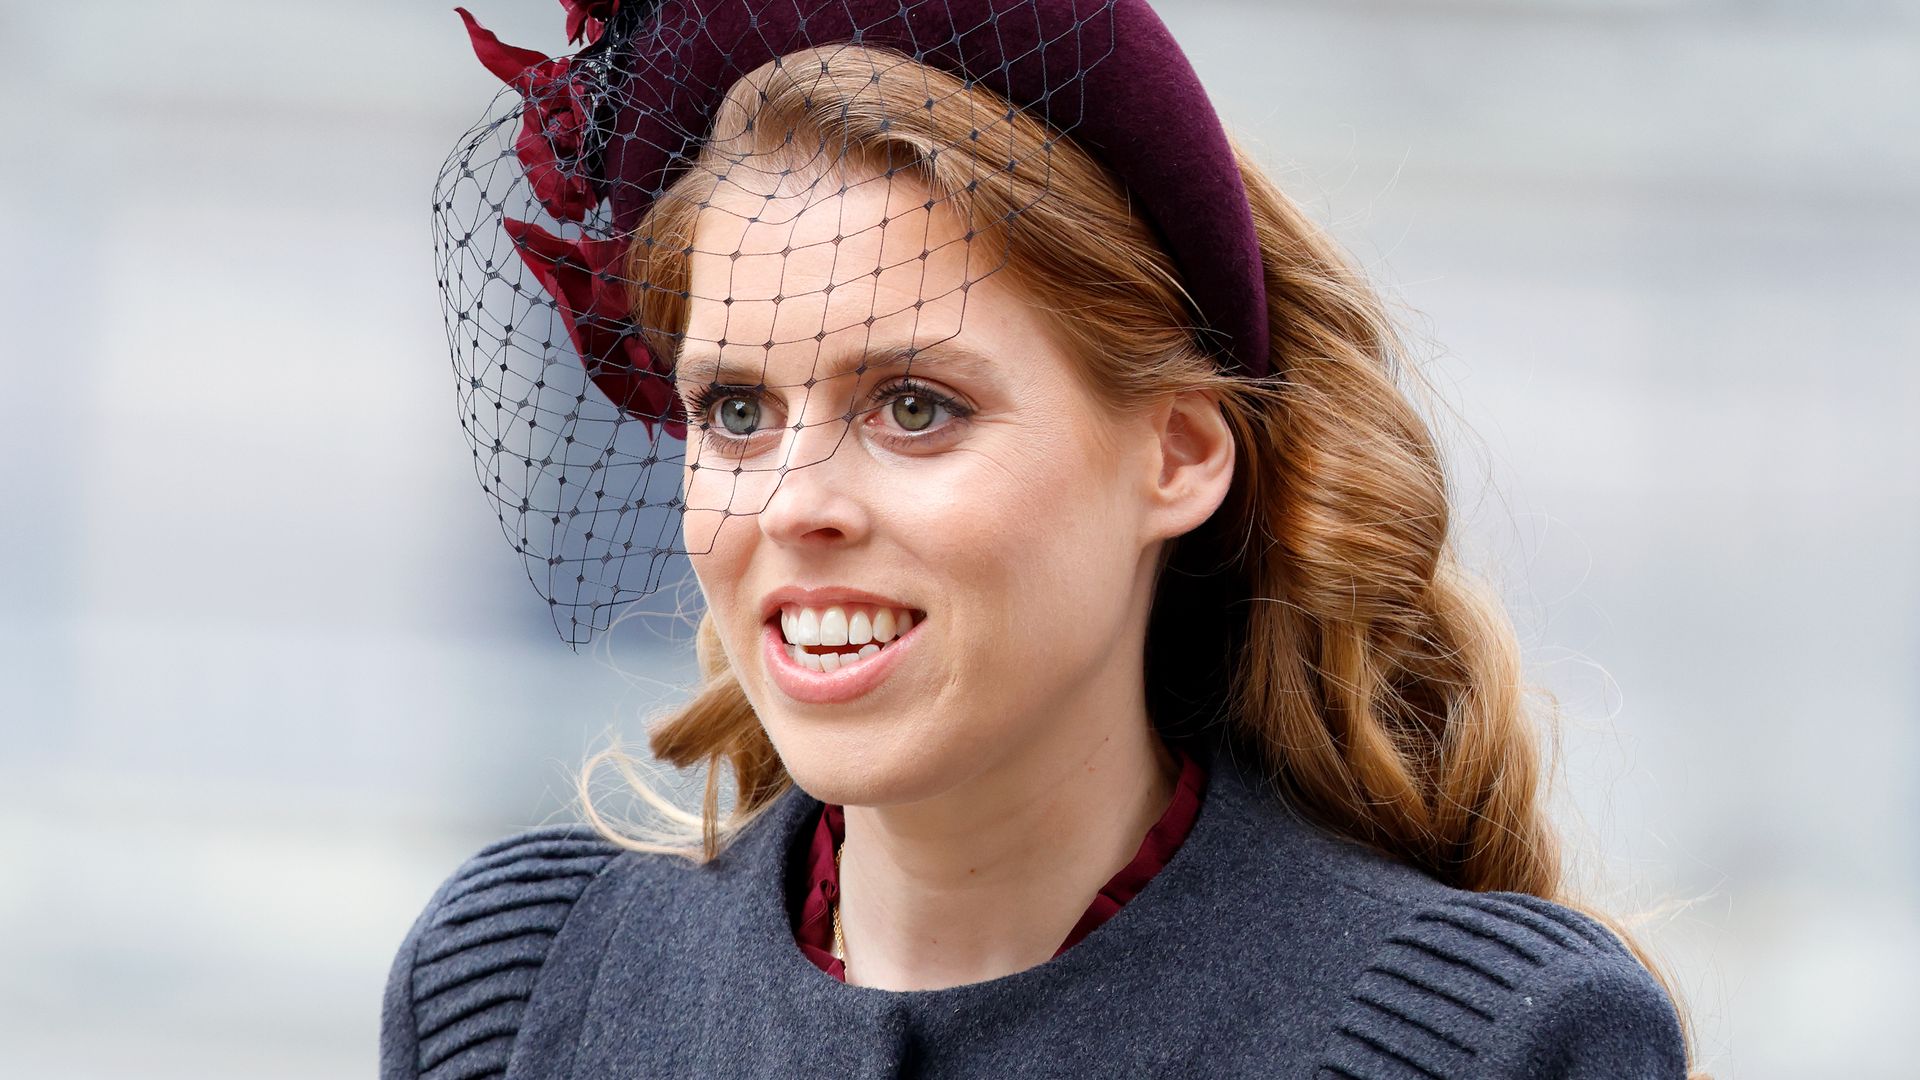 Princess Beatrice blooms in spectacular flower crown as she lets her hair down